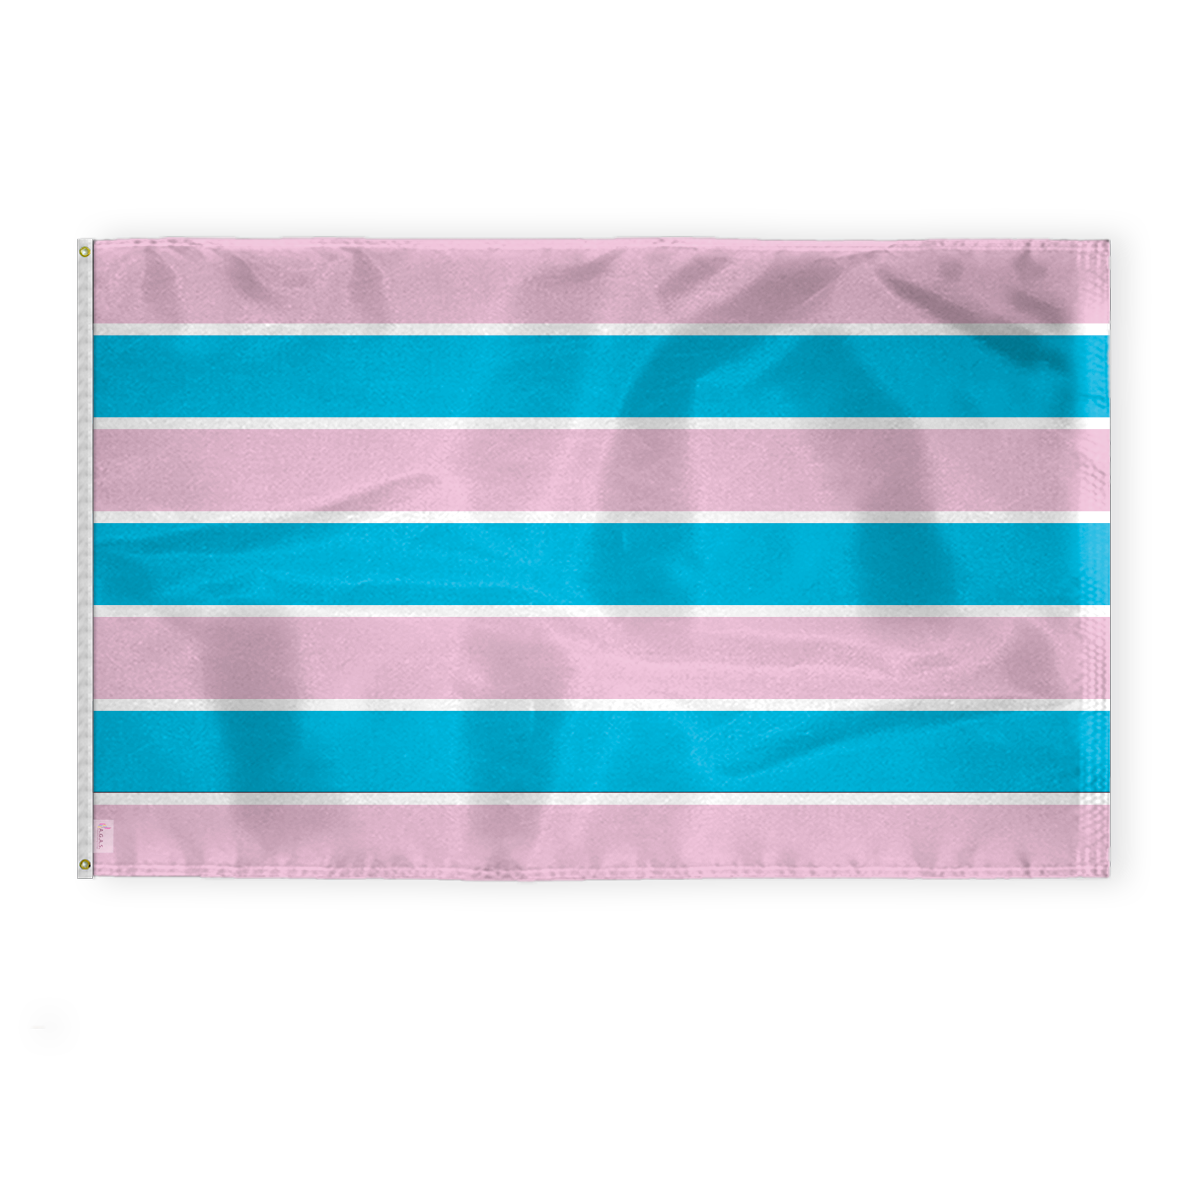 AGAS Large Transsexual Pride Flag 6x10 Ft